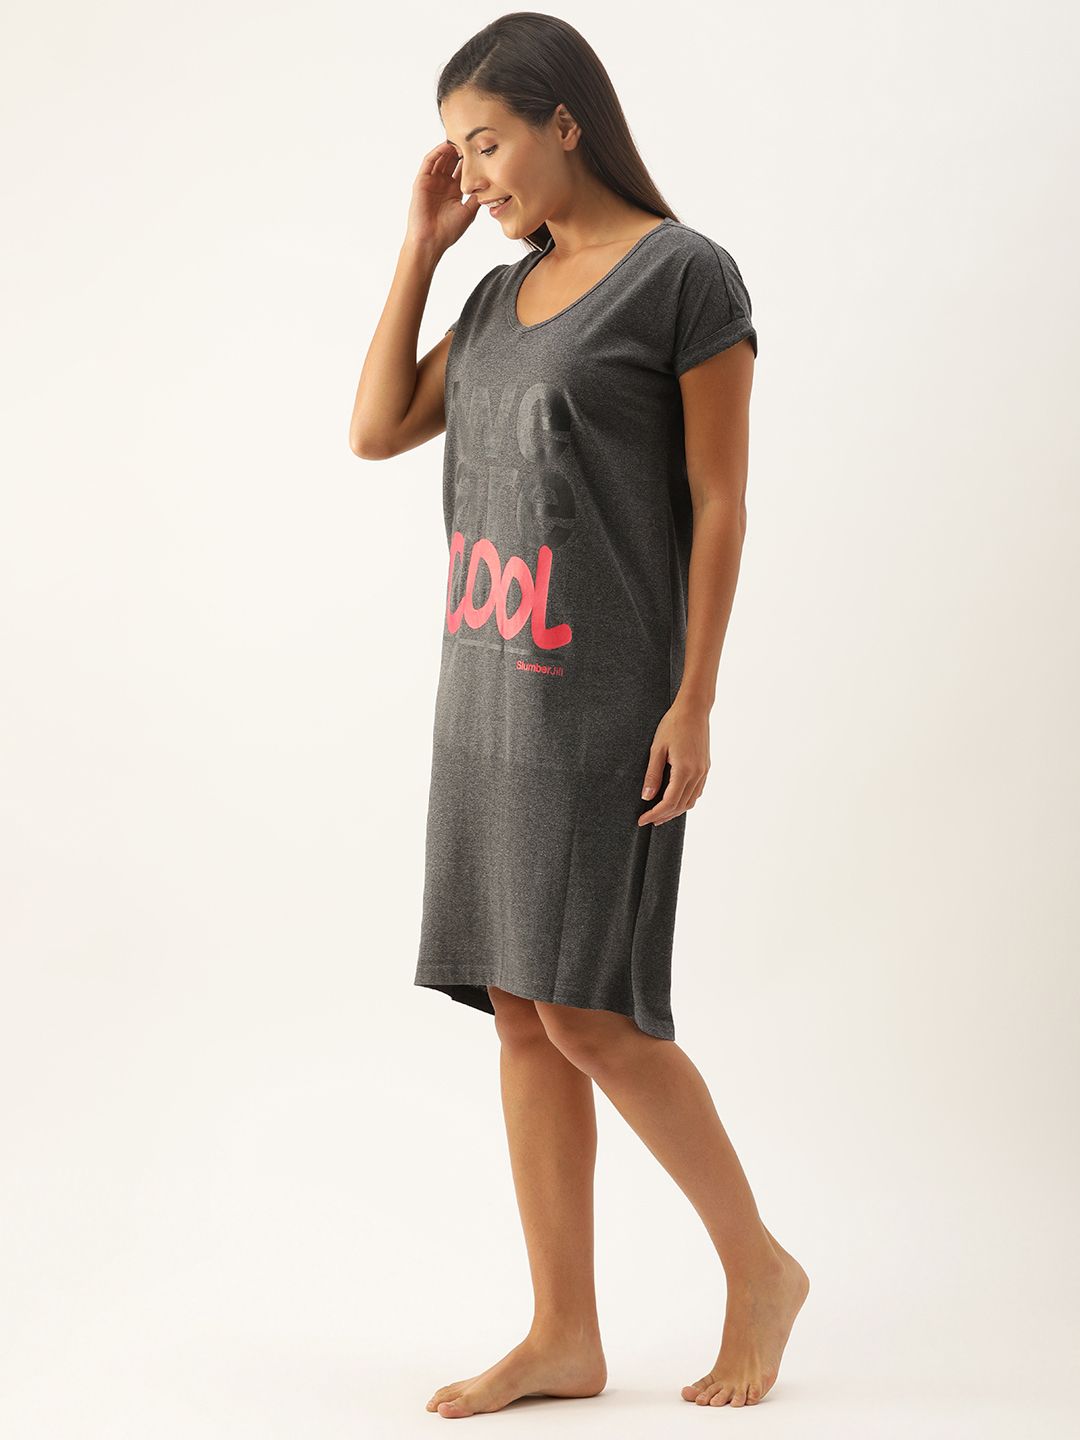 Loose Fit "We are Cool" Sleep Shirt - Colour Charcoal